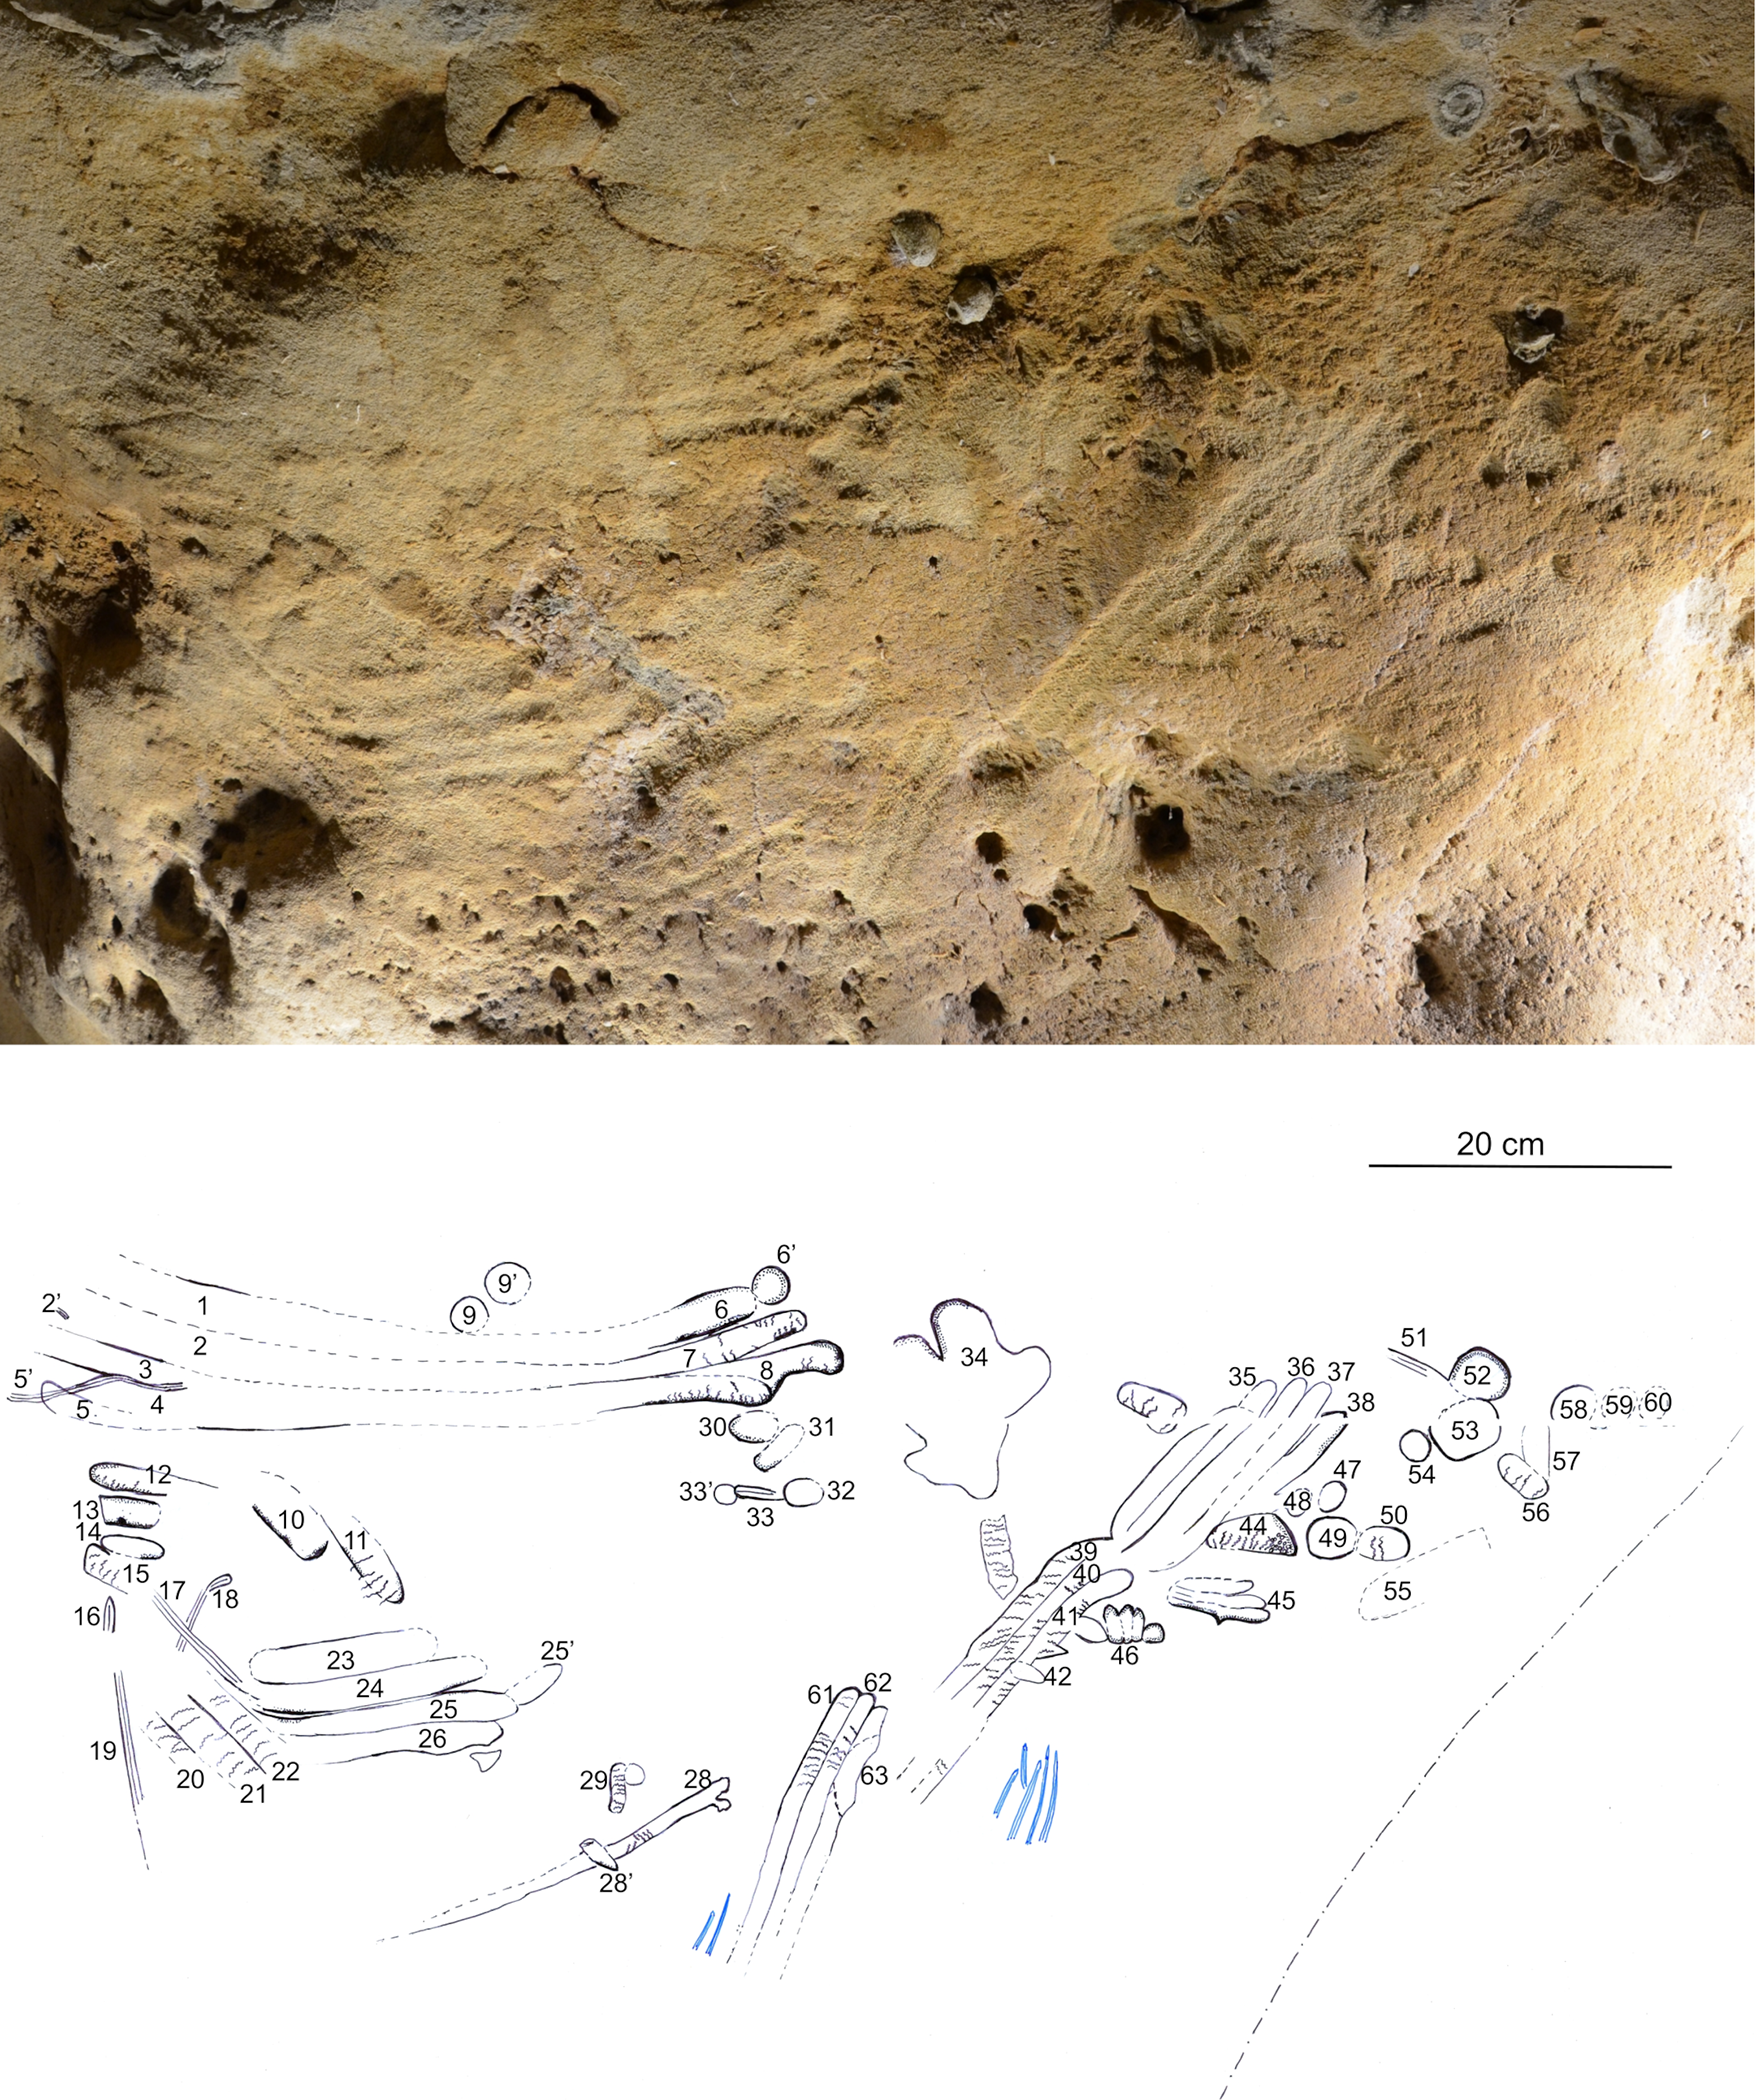 57,000-Year-Old Cave Engravings Were the Work of Neanderthals, Researchers Say